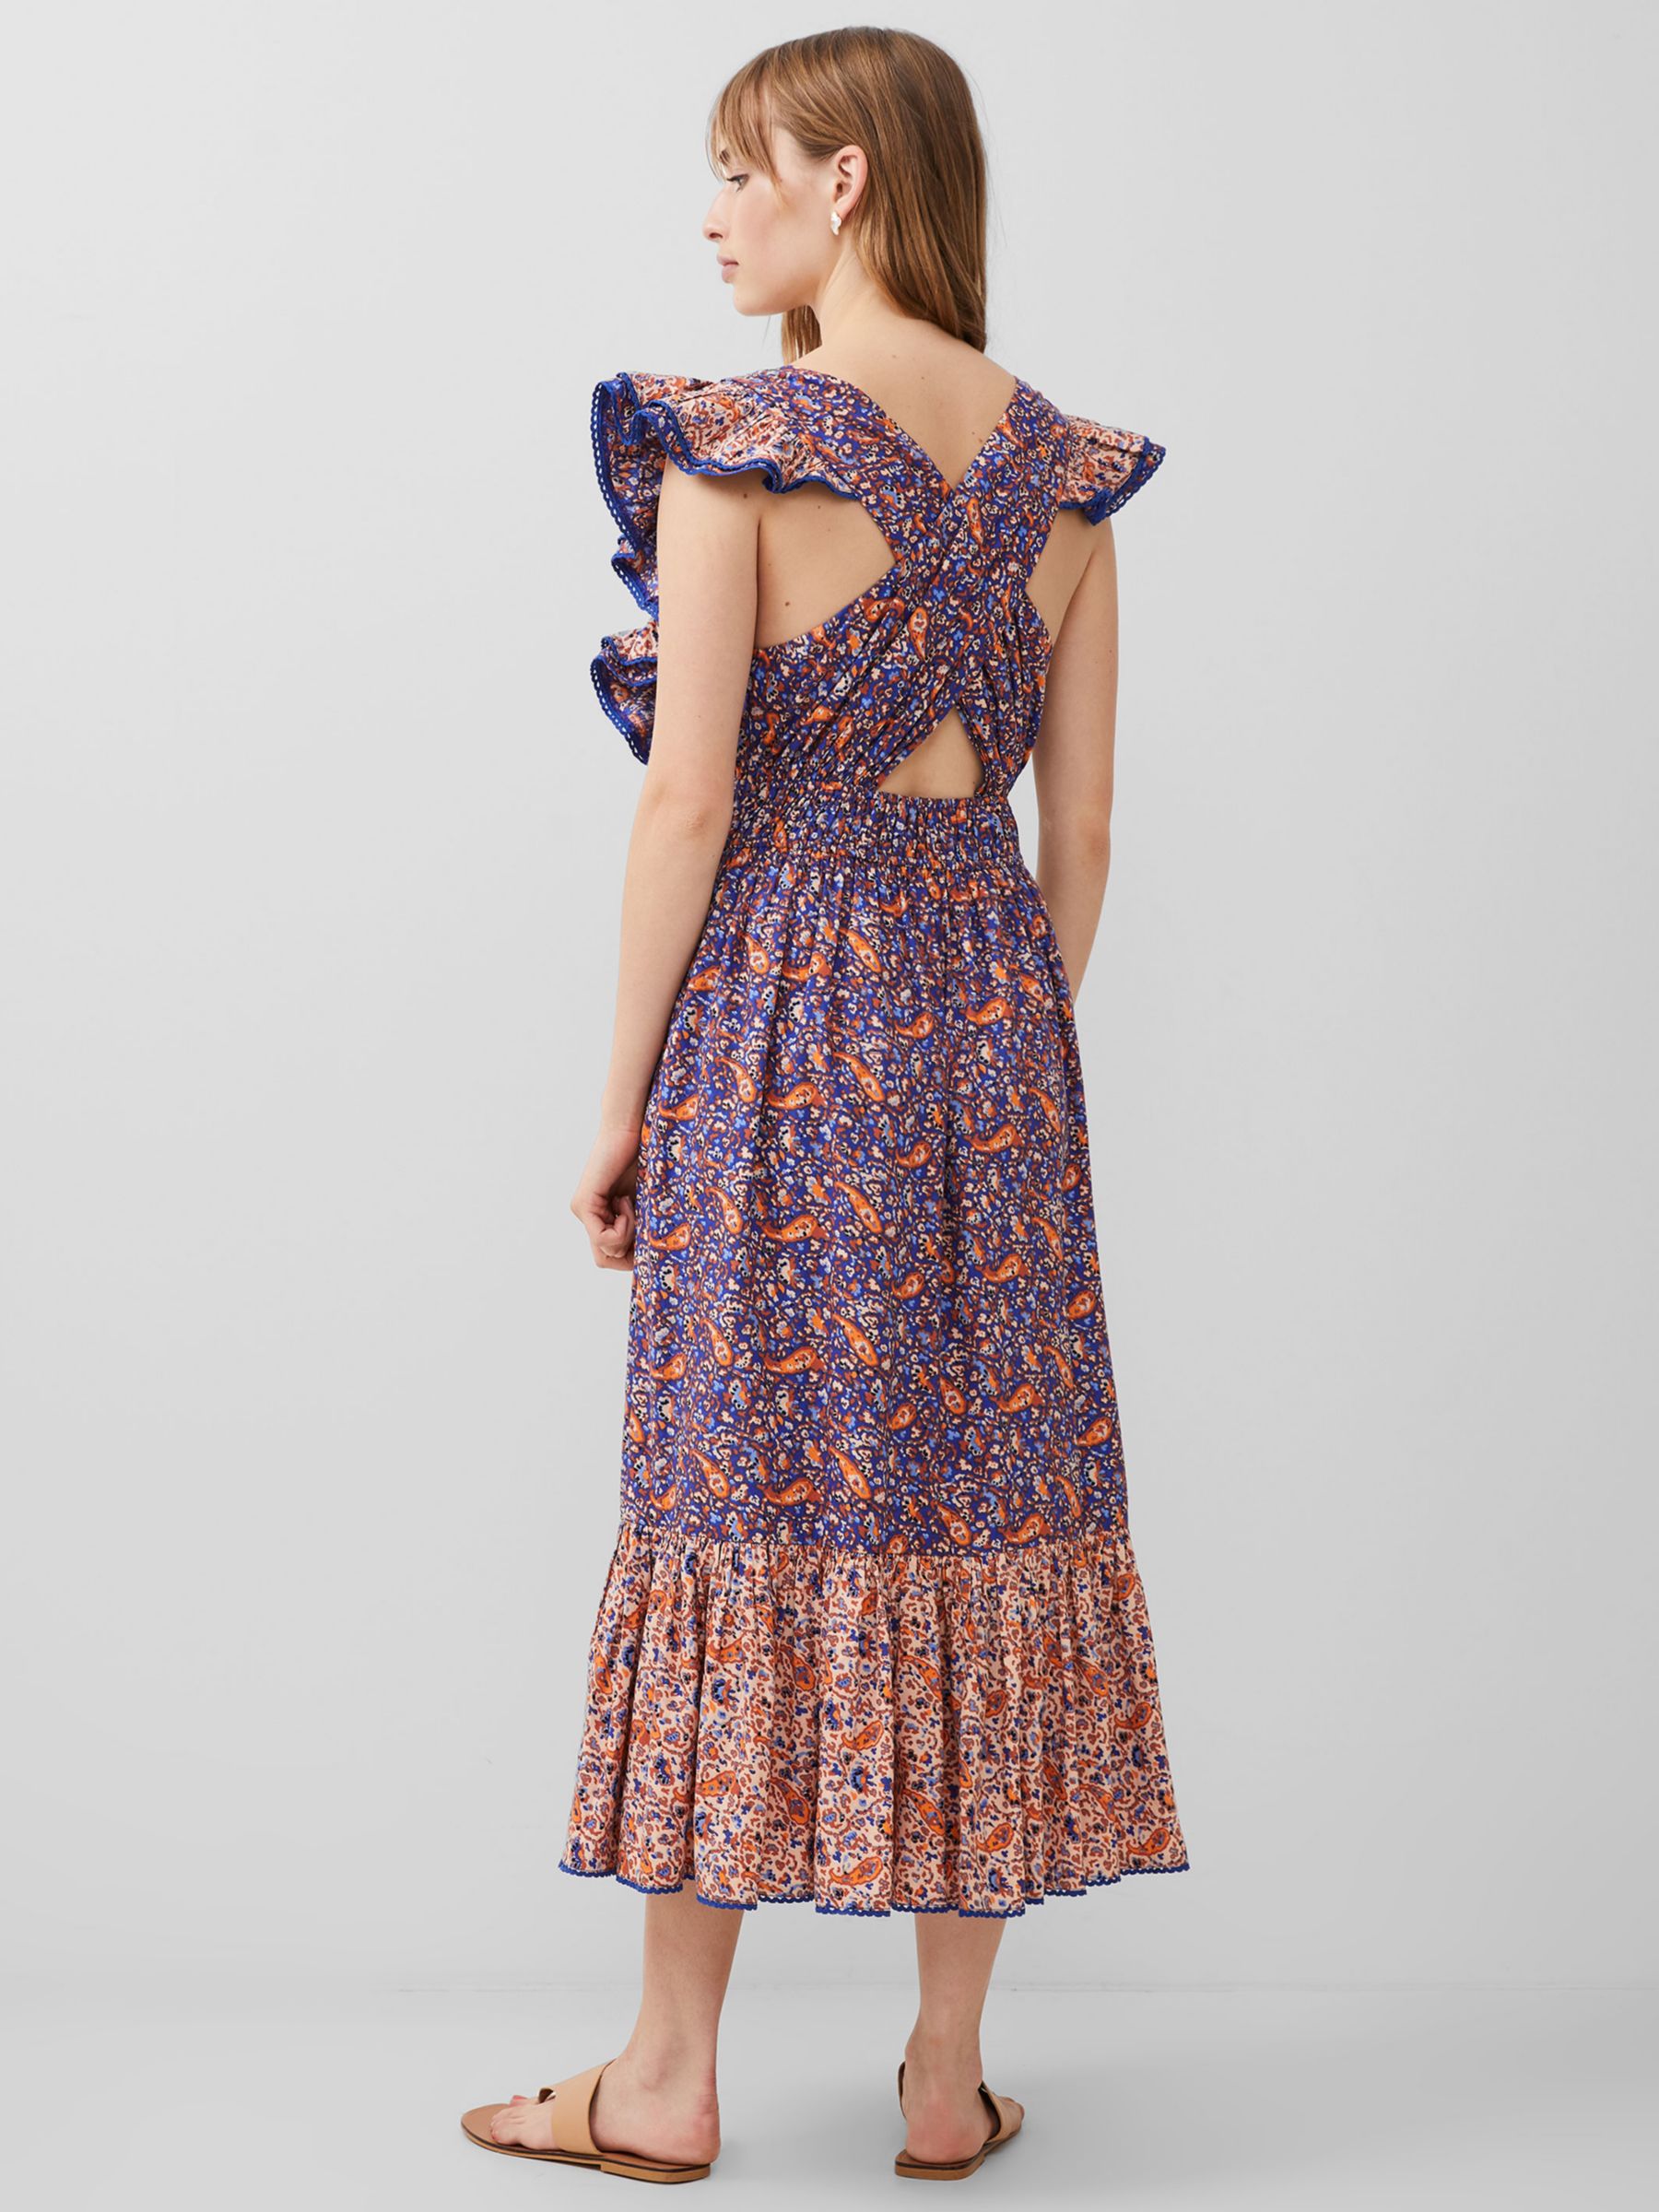 Buy French Connection Anathia Blaire Paisley Print Frill Trim Maxi Dress, Royal Blue/Peach Online at johnlewis.com